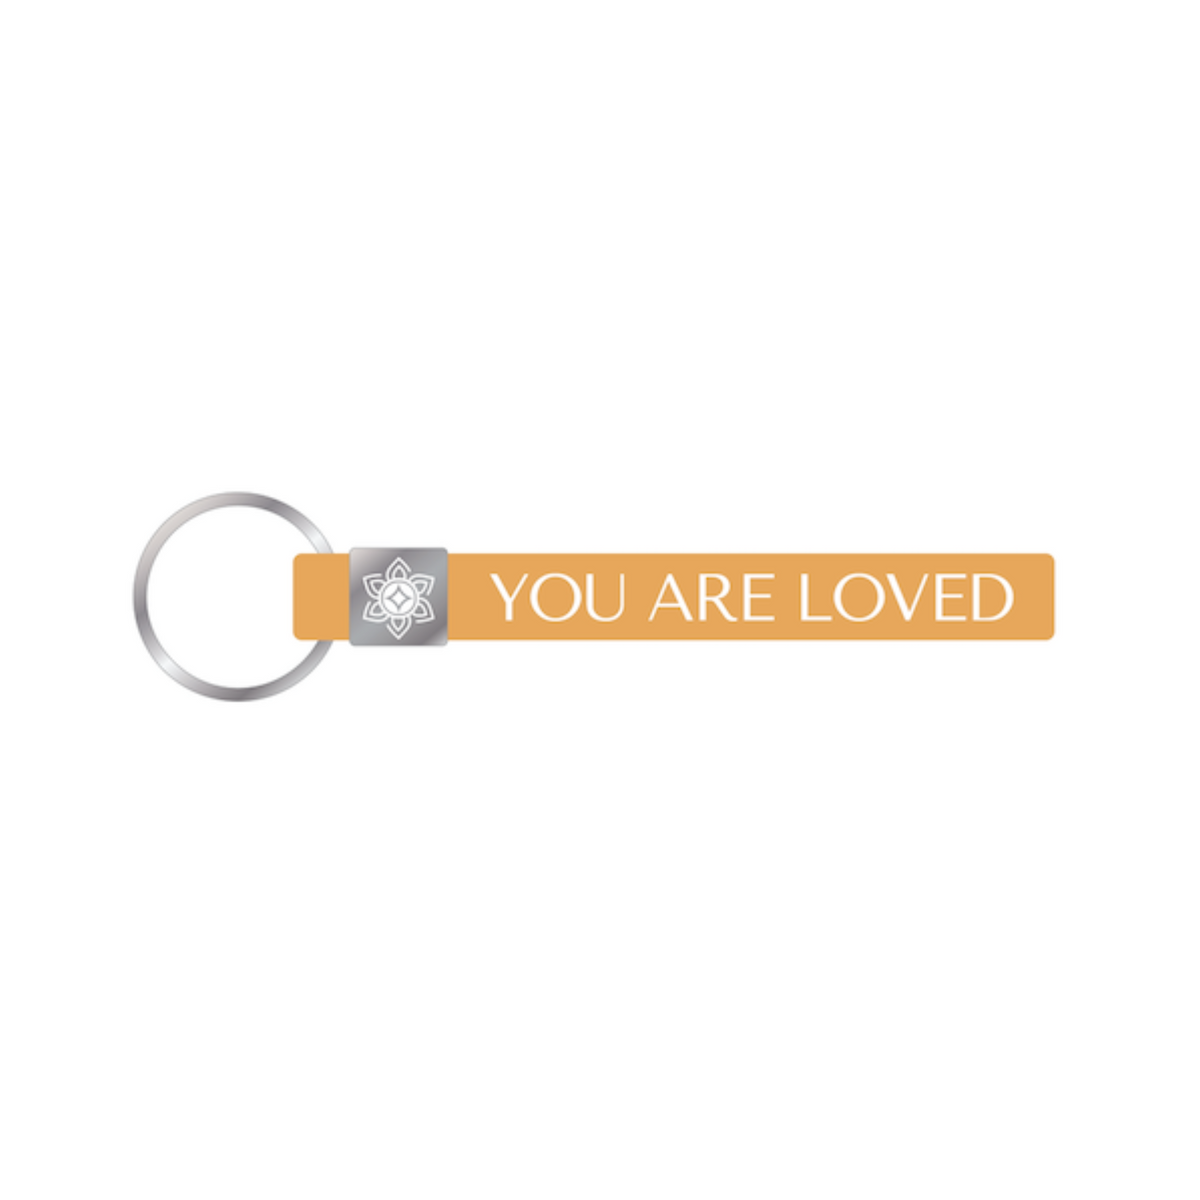 You are Loved (Keychain)